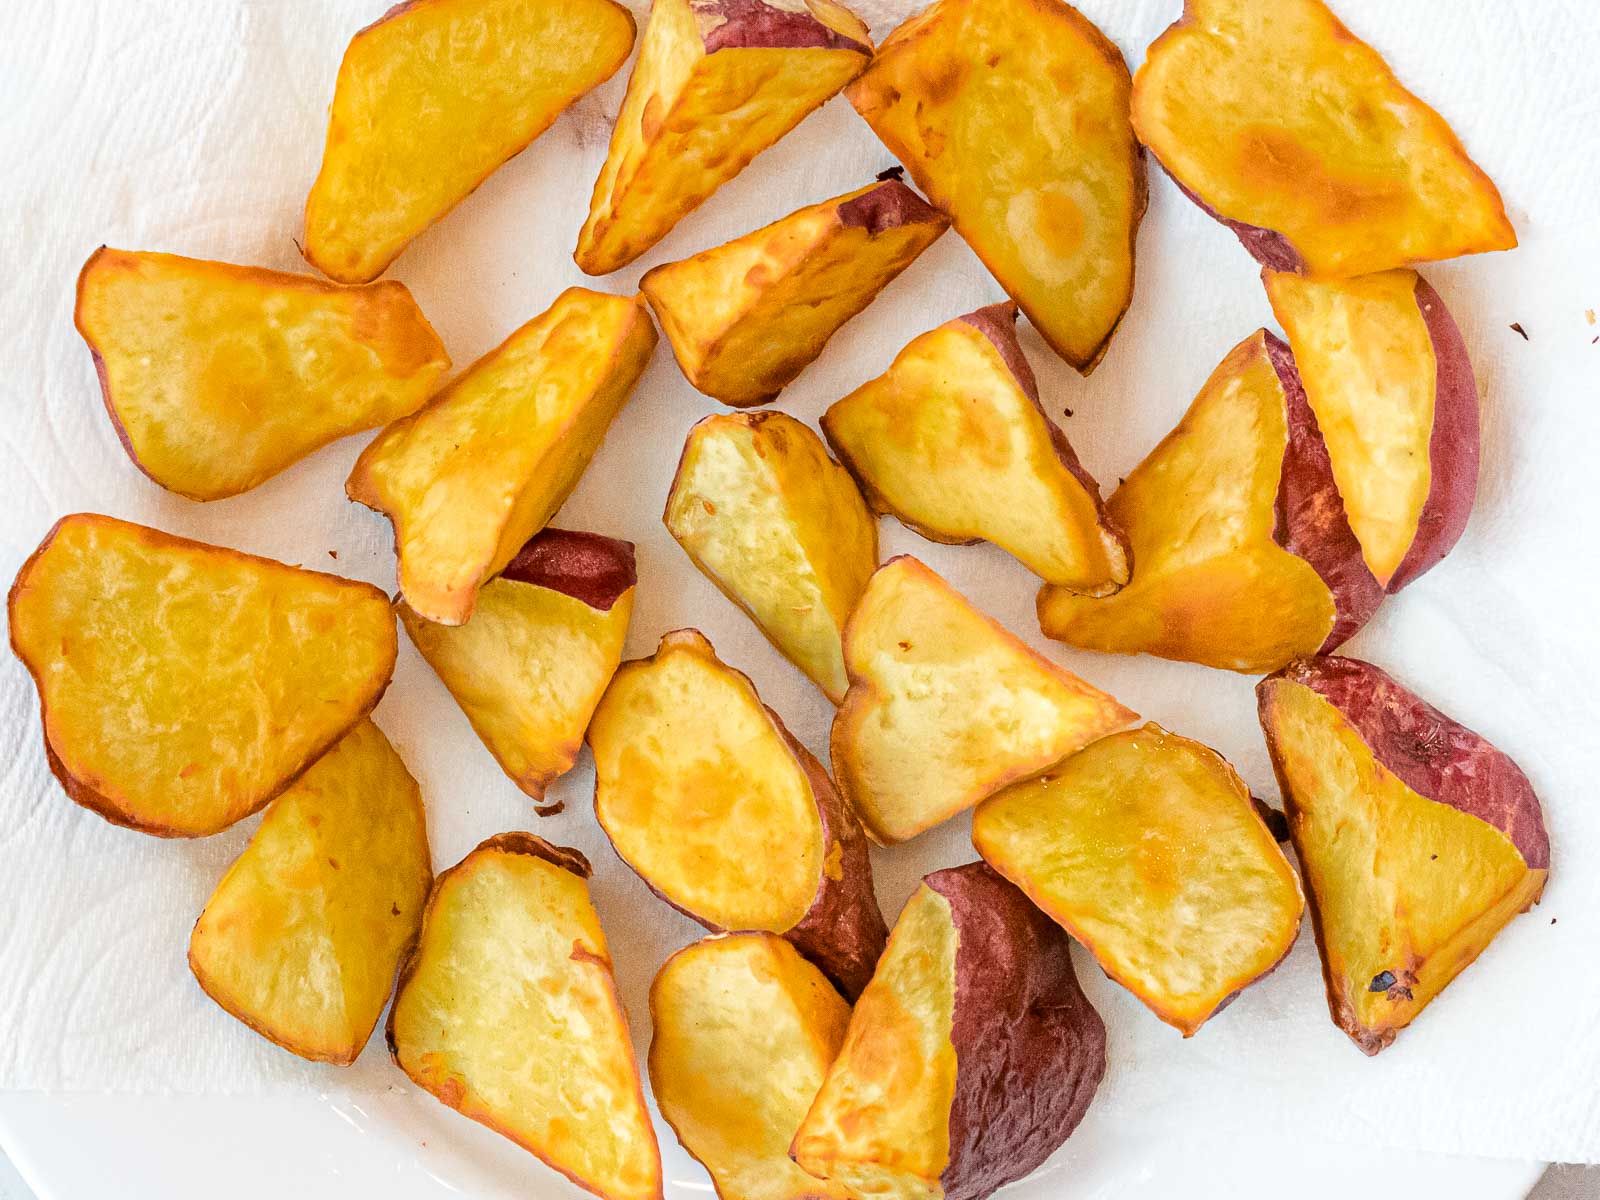 golden brown fried sweet potato pieces on a paper towel